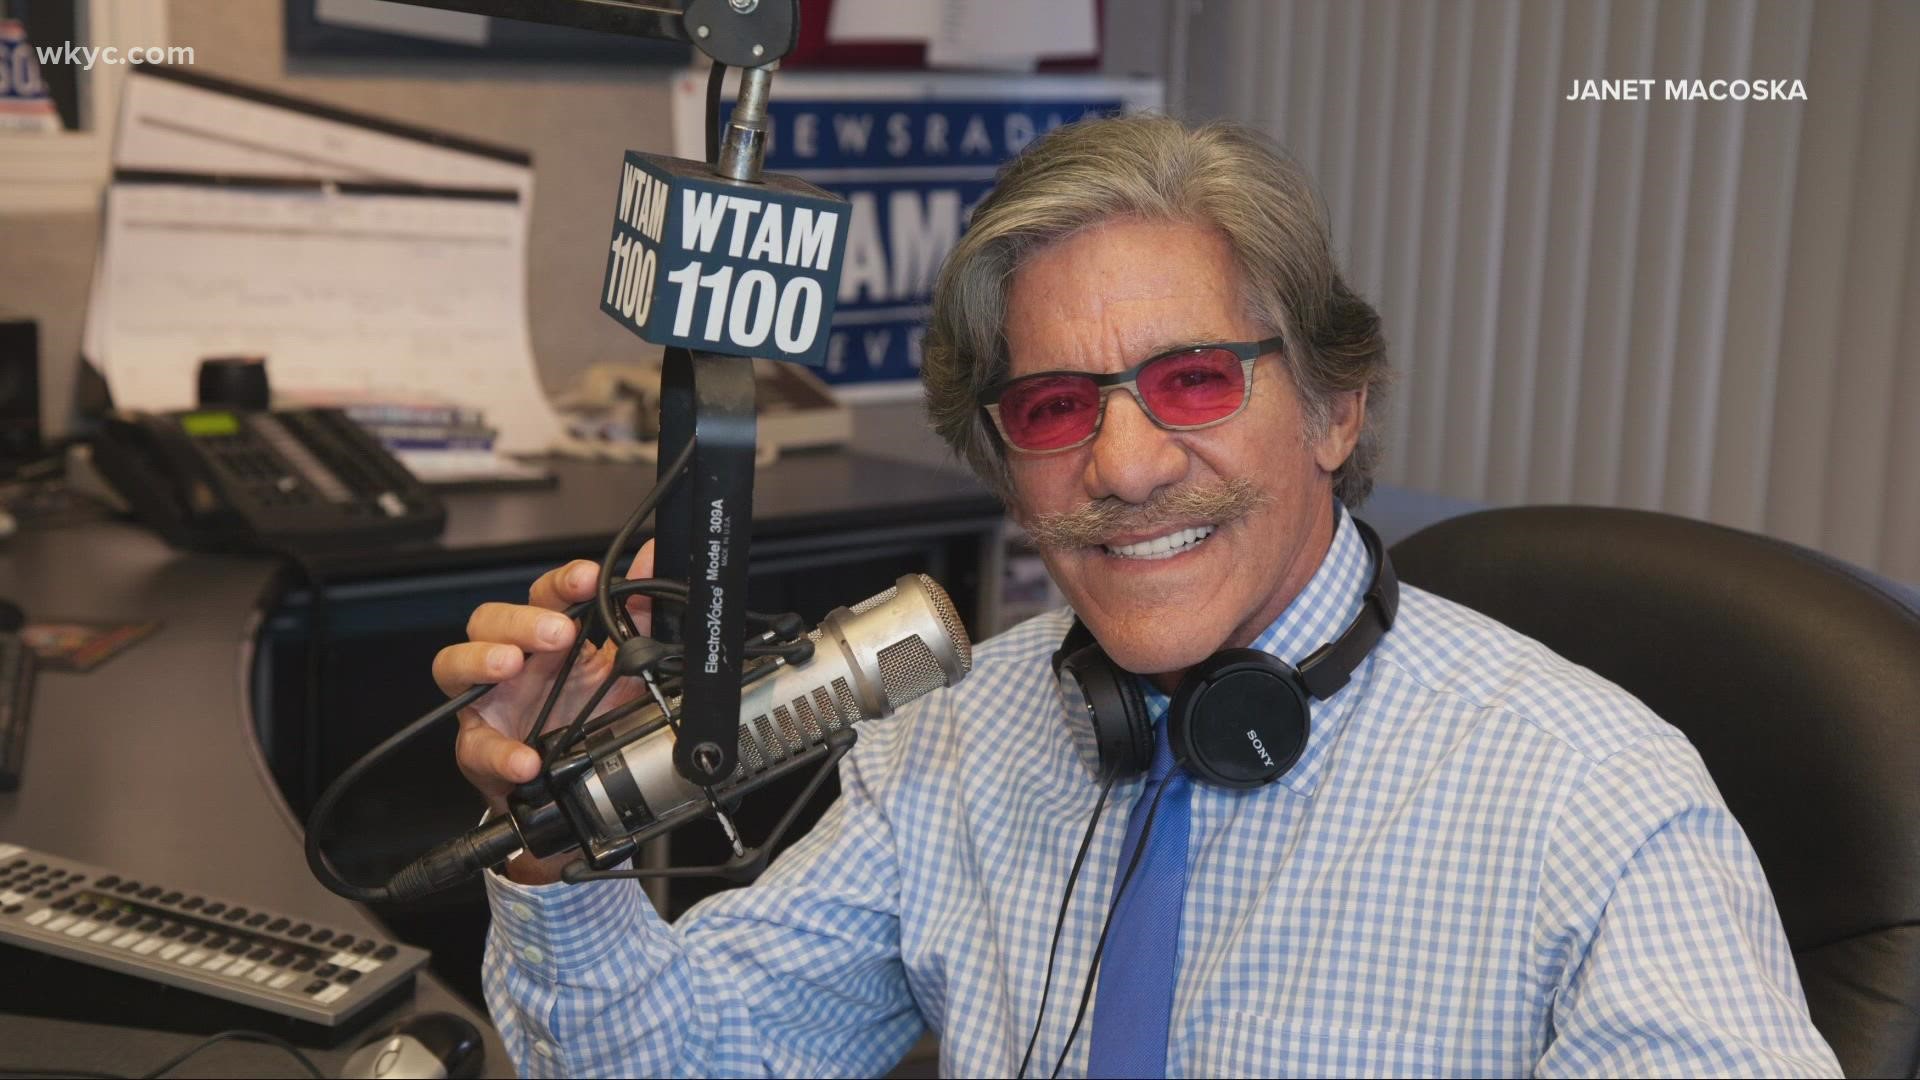 Nearly four years after arriving in Northeast Ohio, Geraldo Rivera is hanging up his headphones at WTAM 1100.